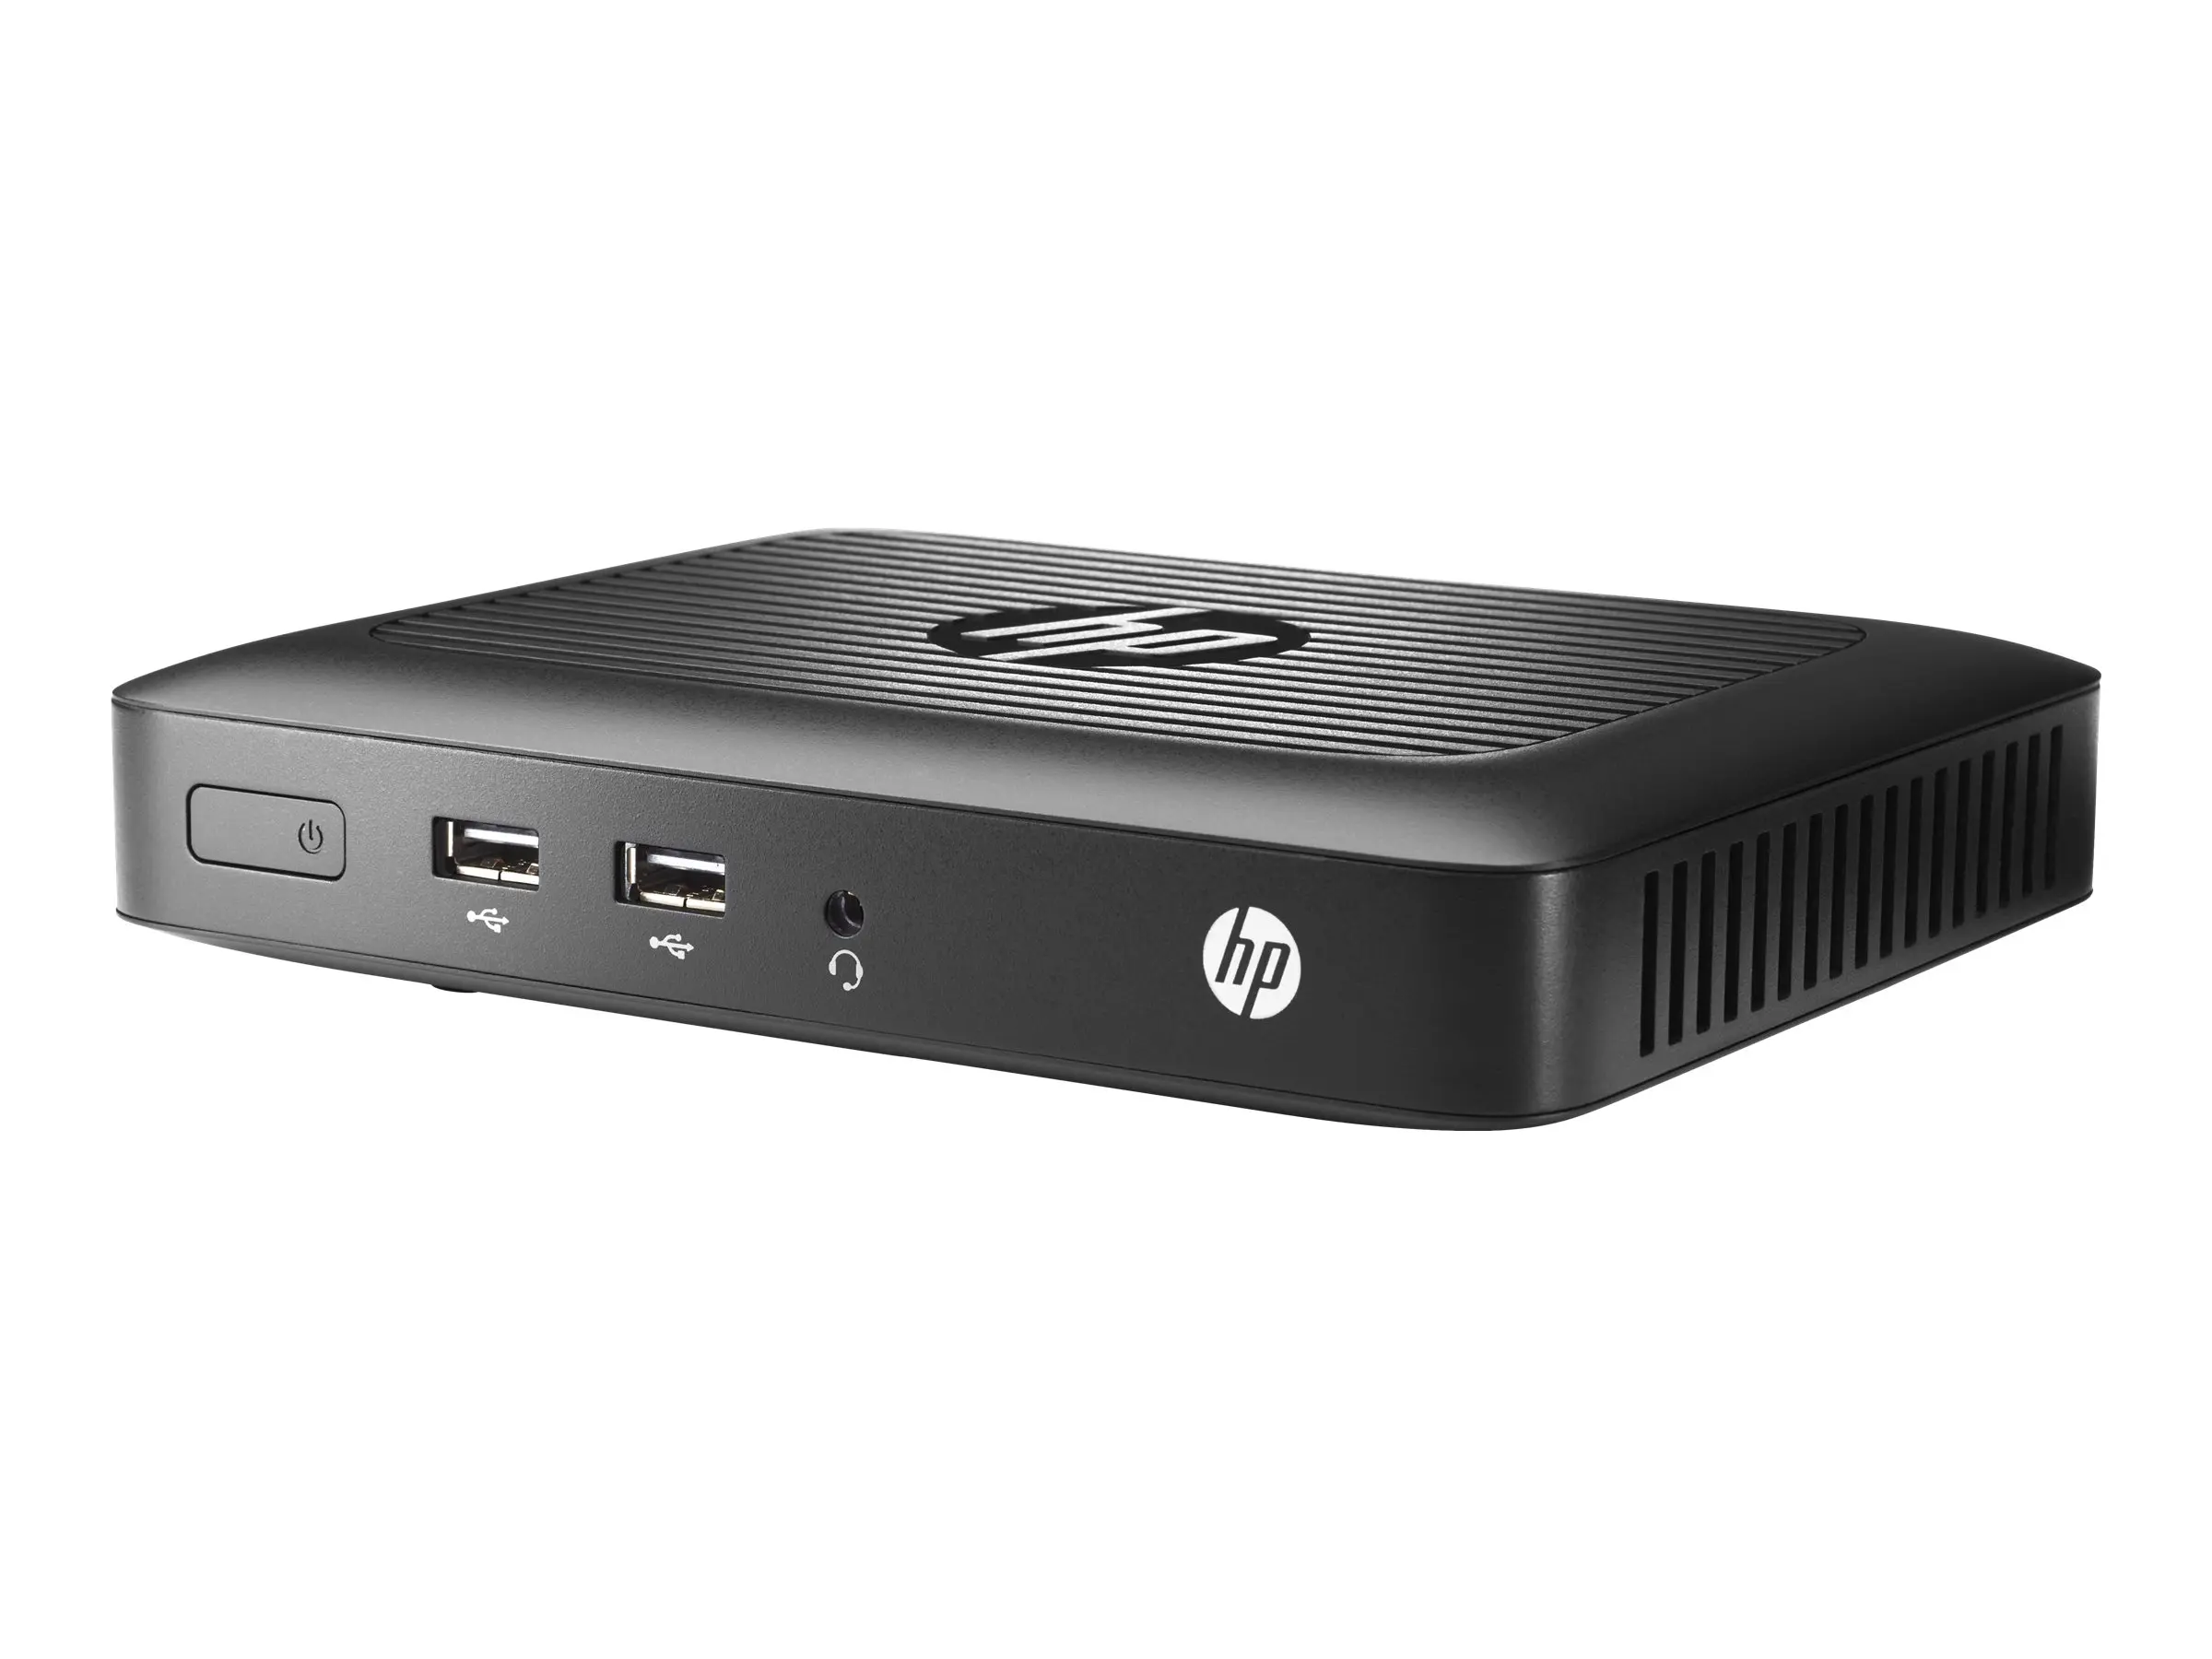 hewlett-packard thin-clients productshp thin client products hp official site - How do I install thin clients